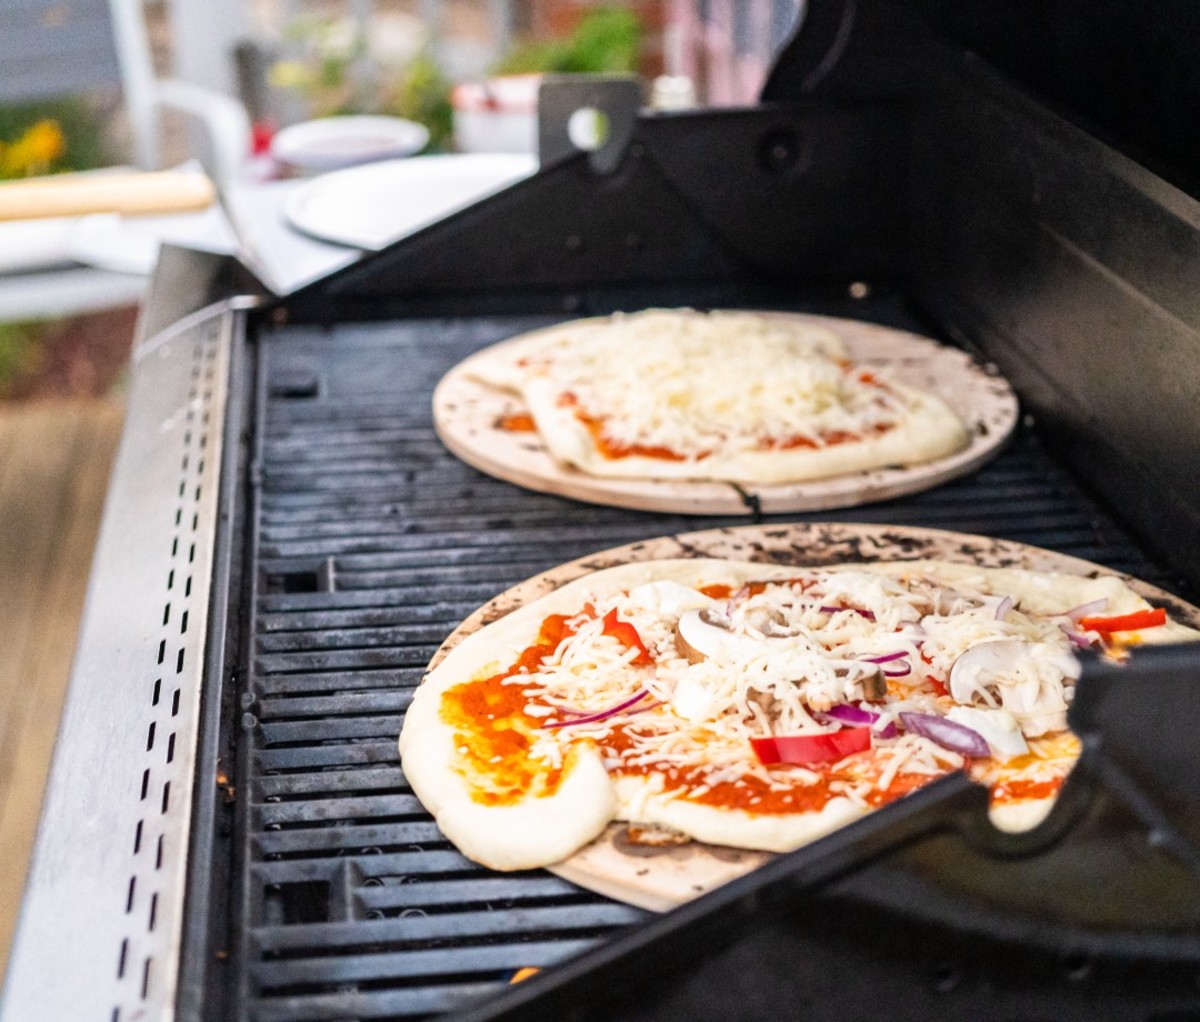 Pizzas on a grill